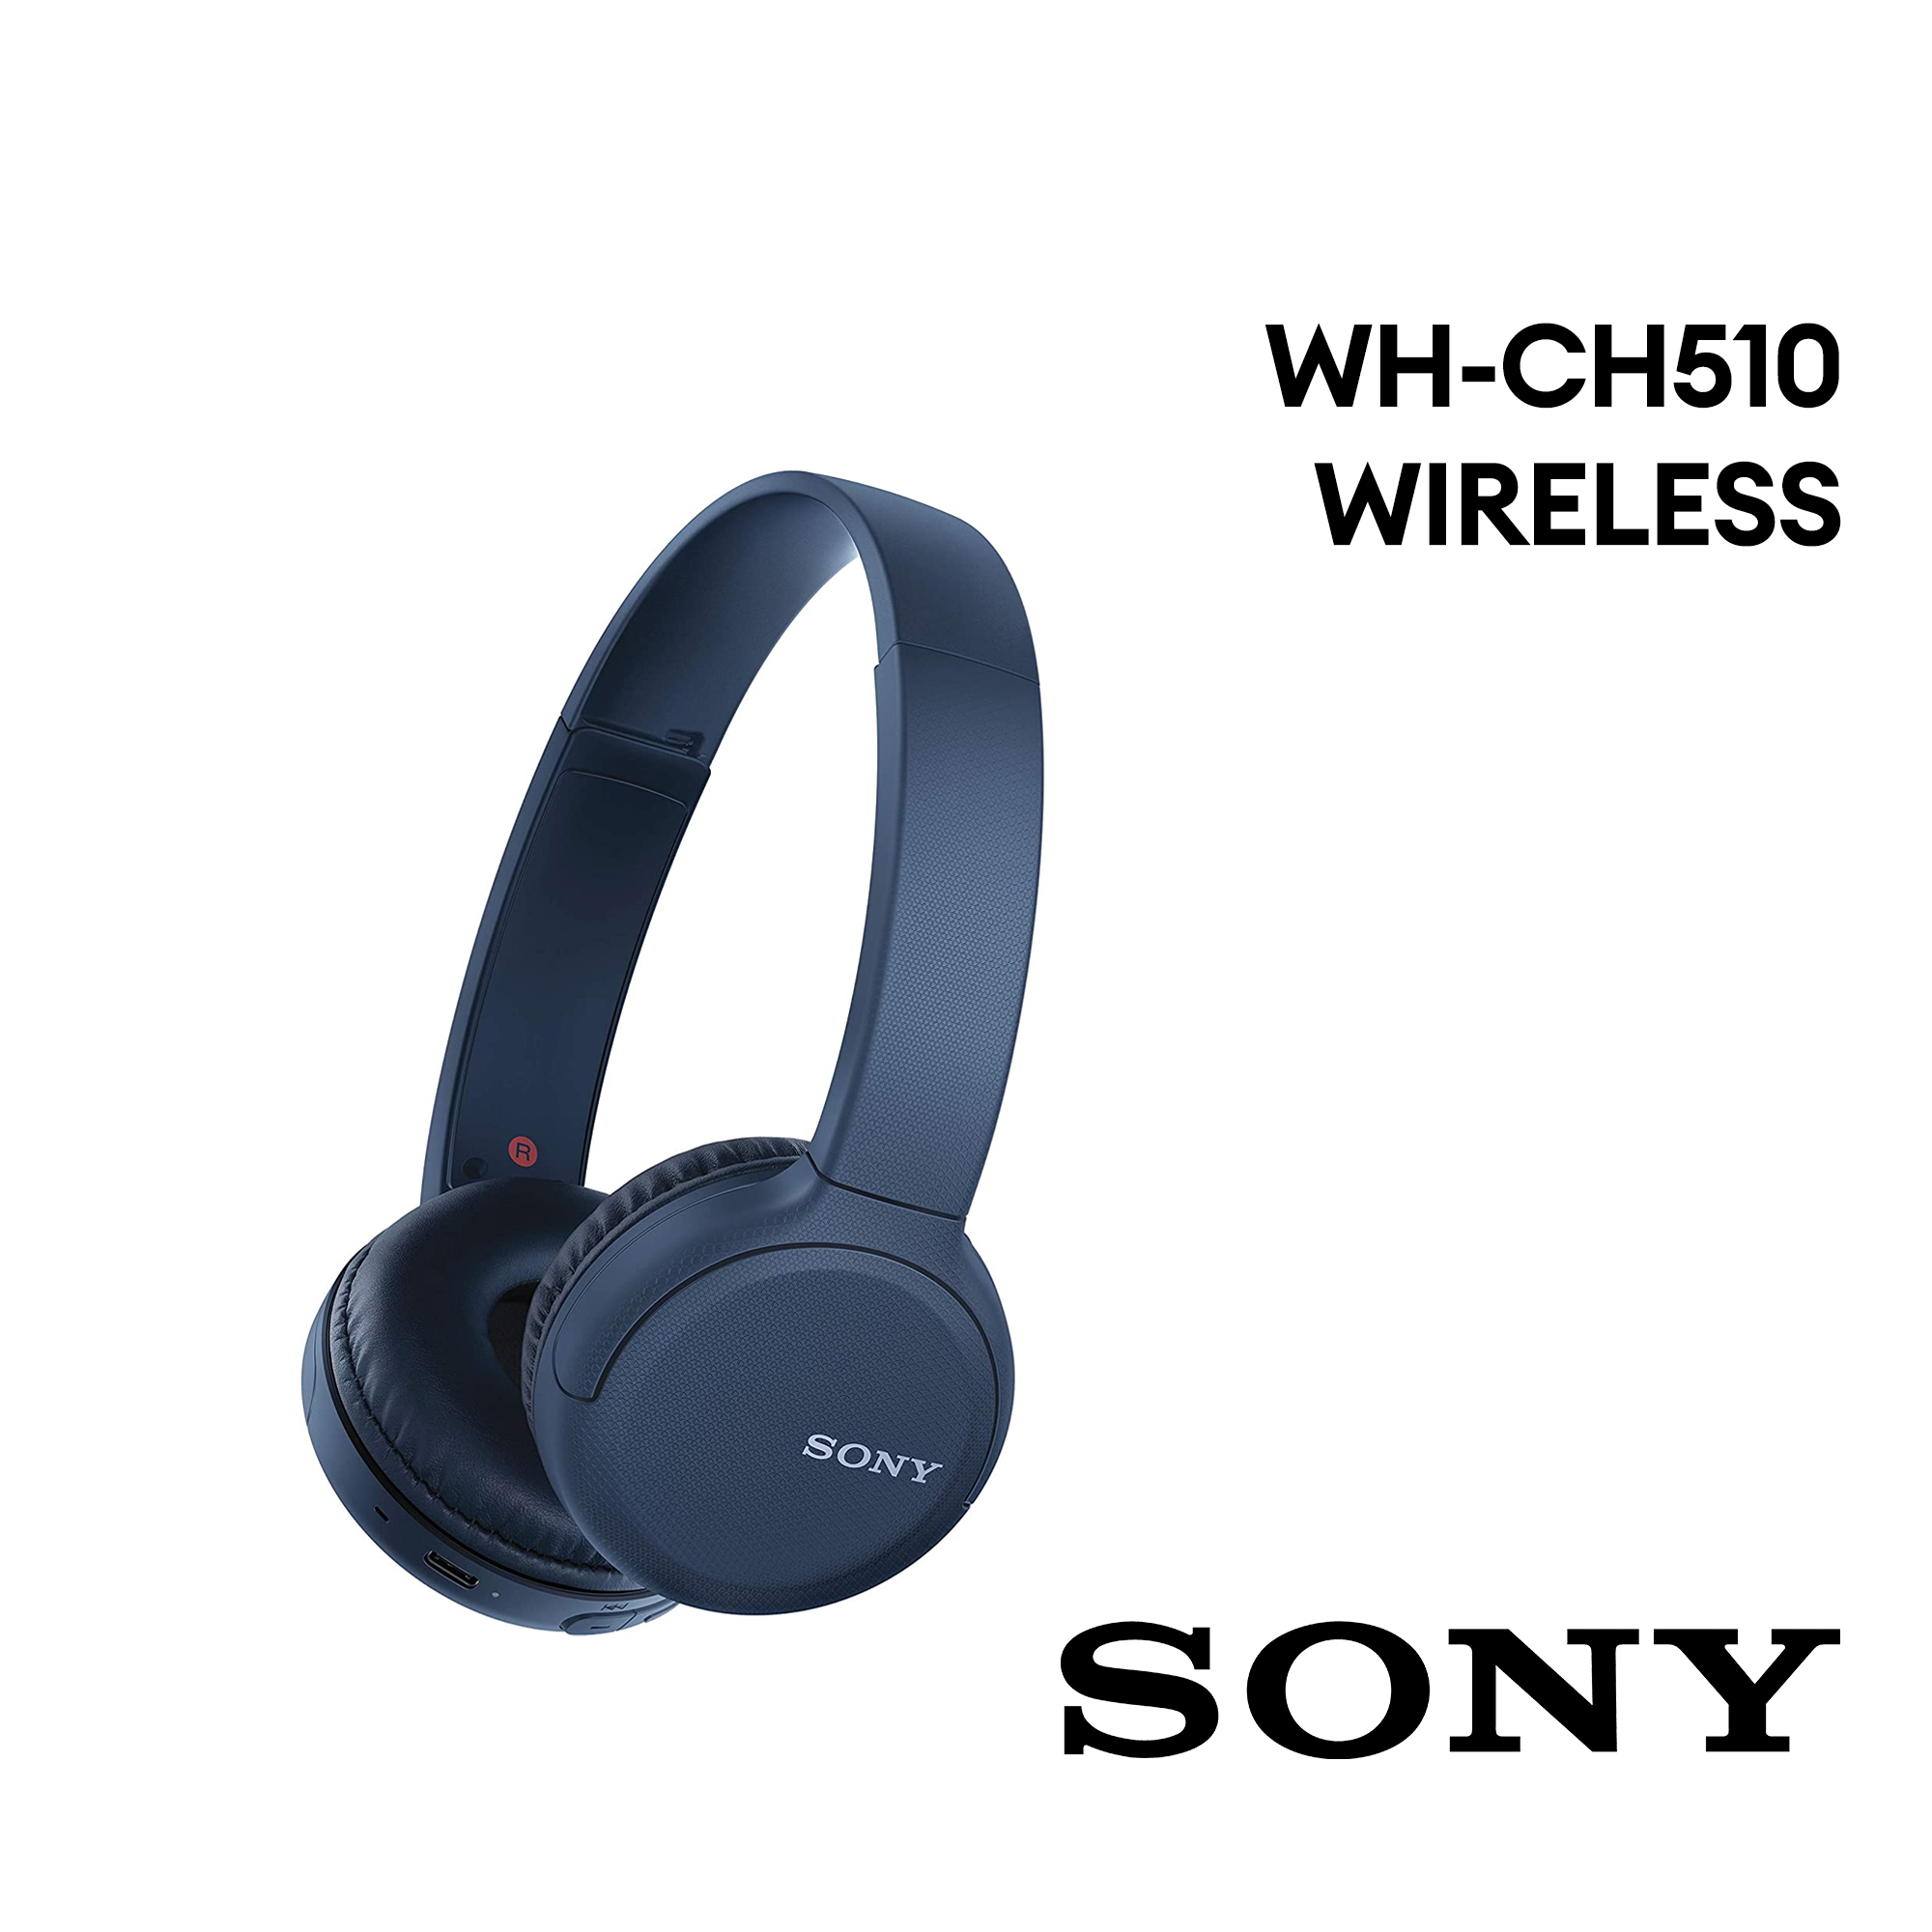 Sony WH-CH520 Wireless On-Ear Bluetooth Headphones Unboxing